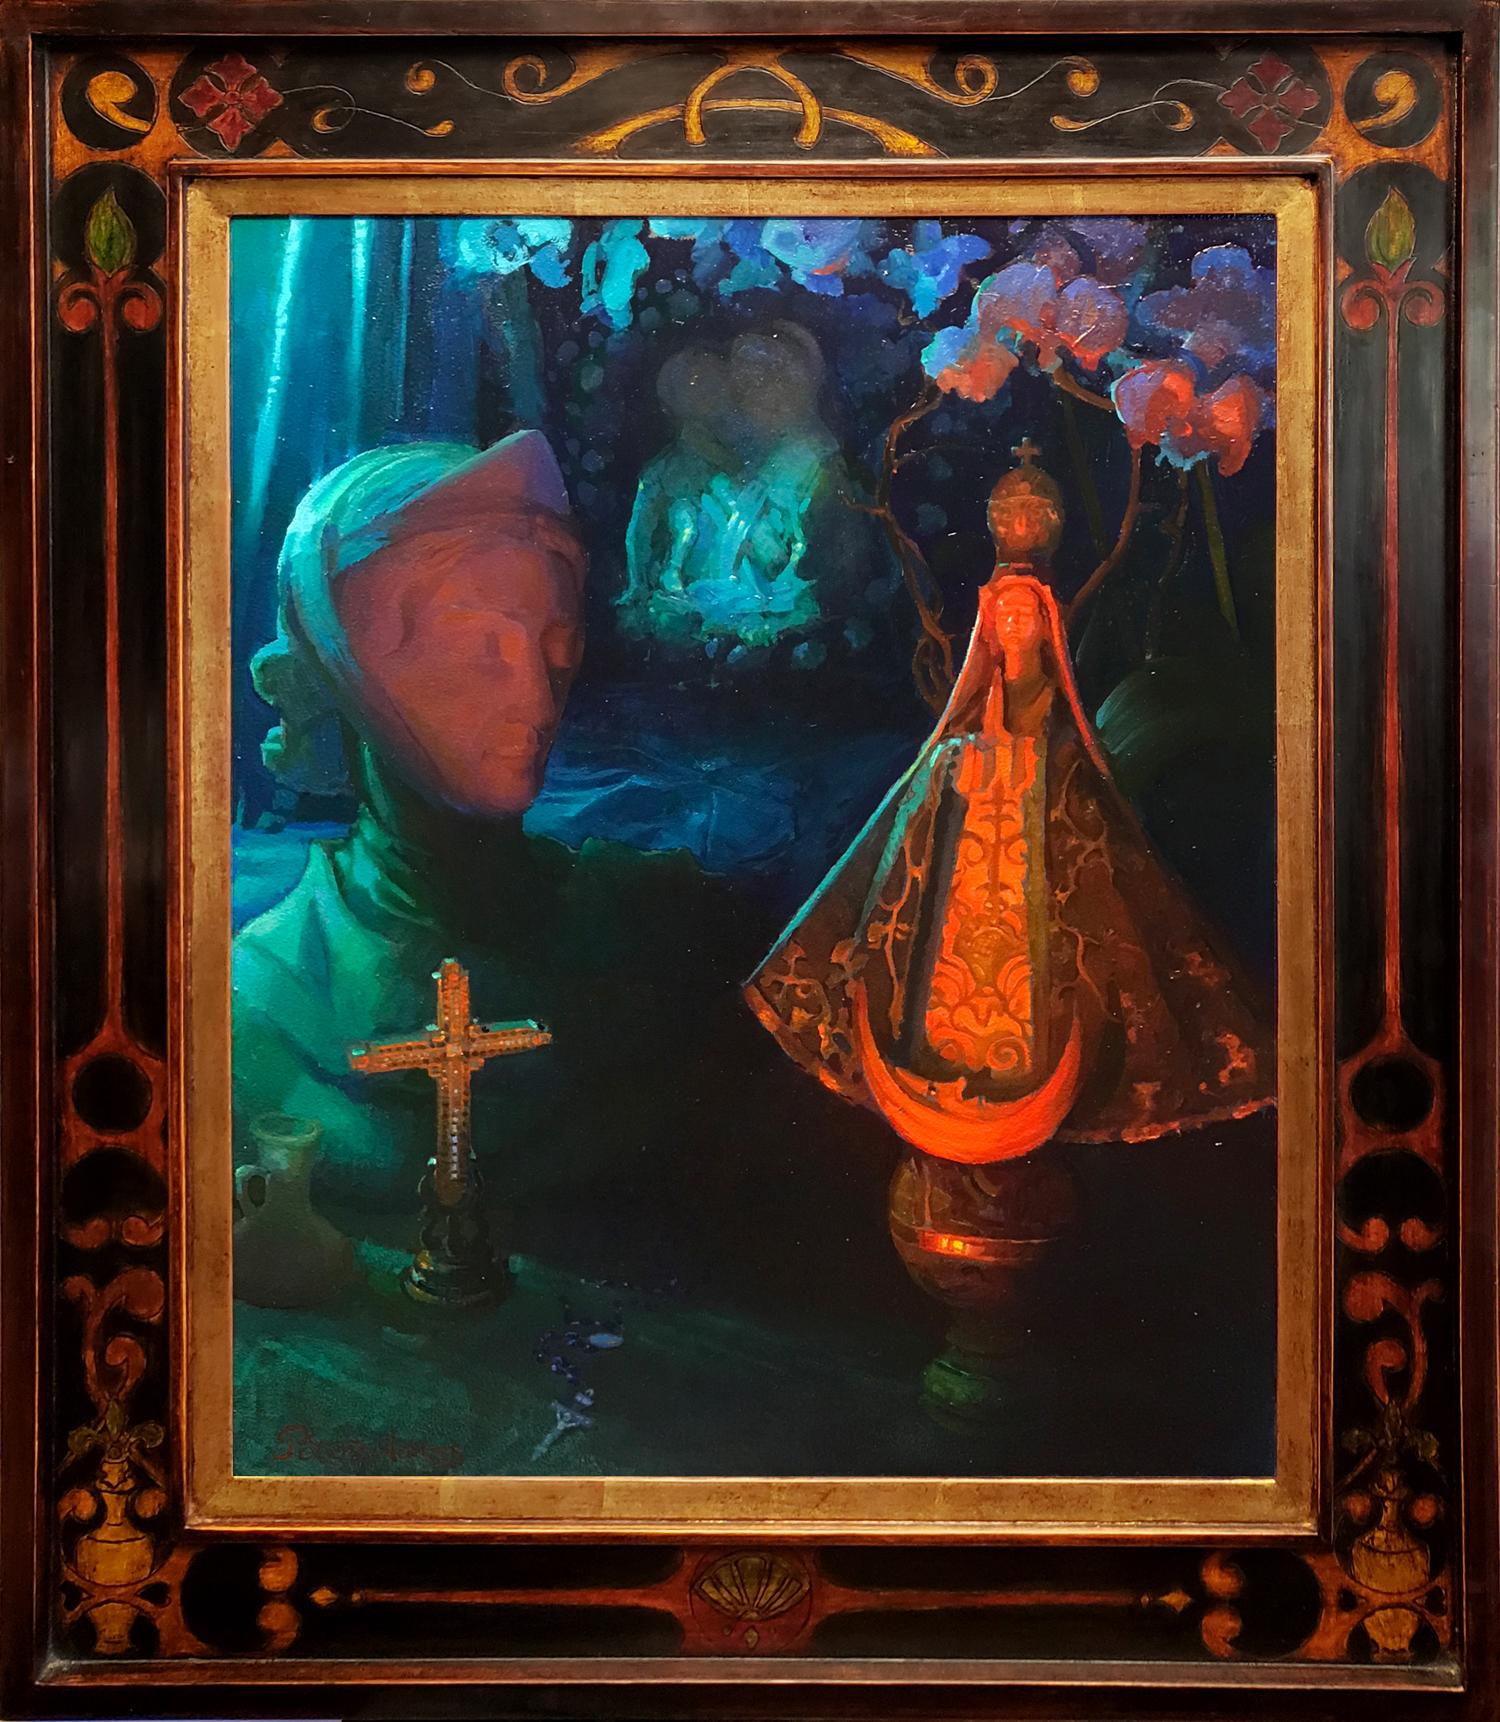 Peter Adams Figurative Painting - Aspects of Mary: Still Life, Religious, Figurative